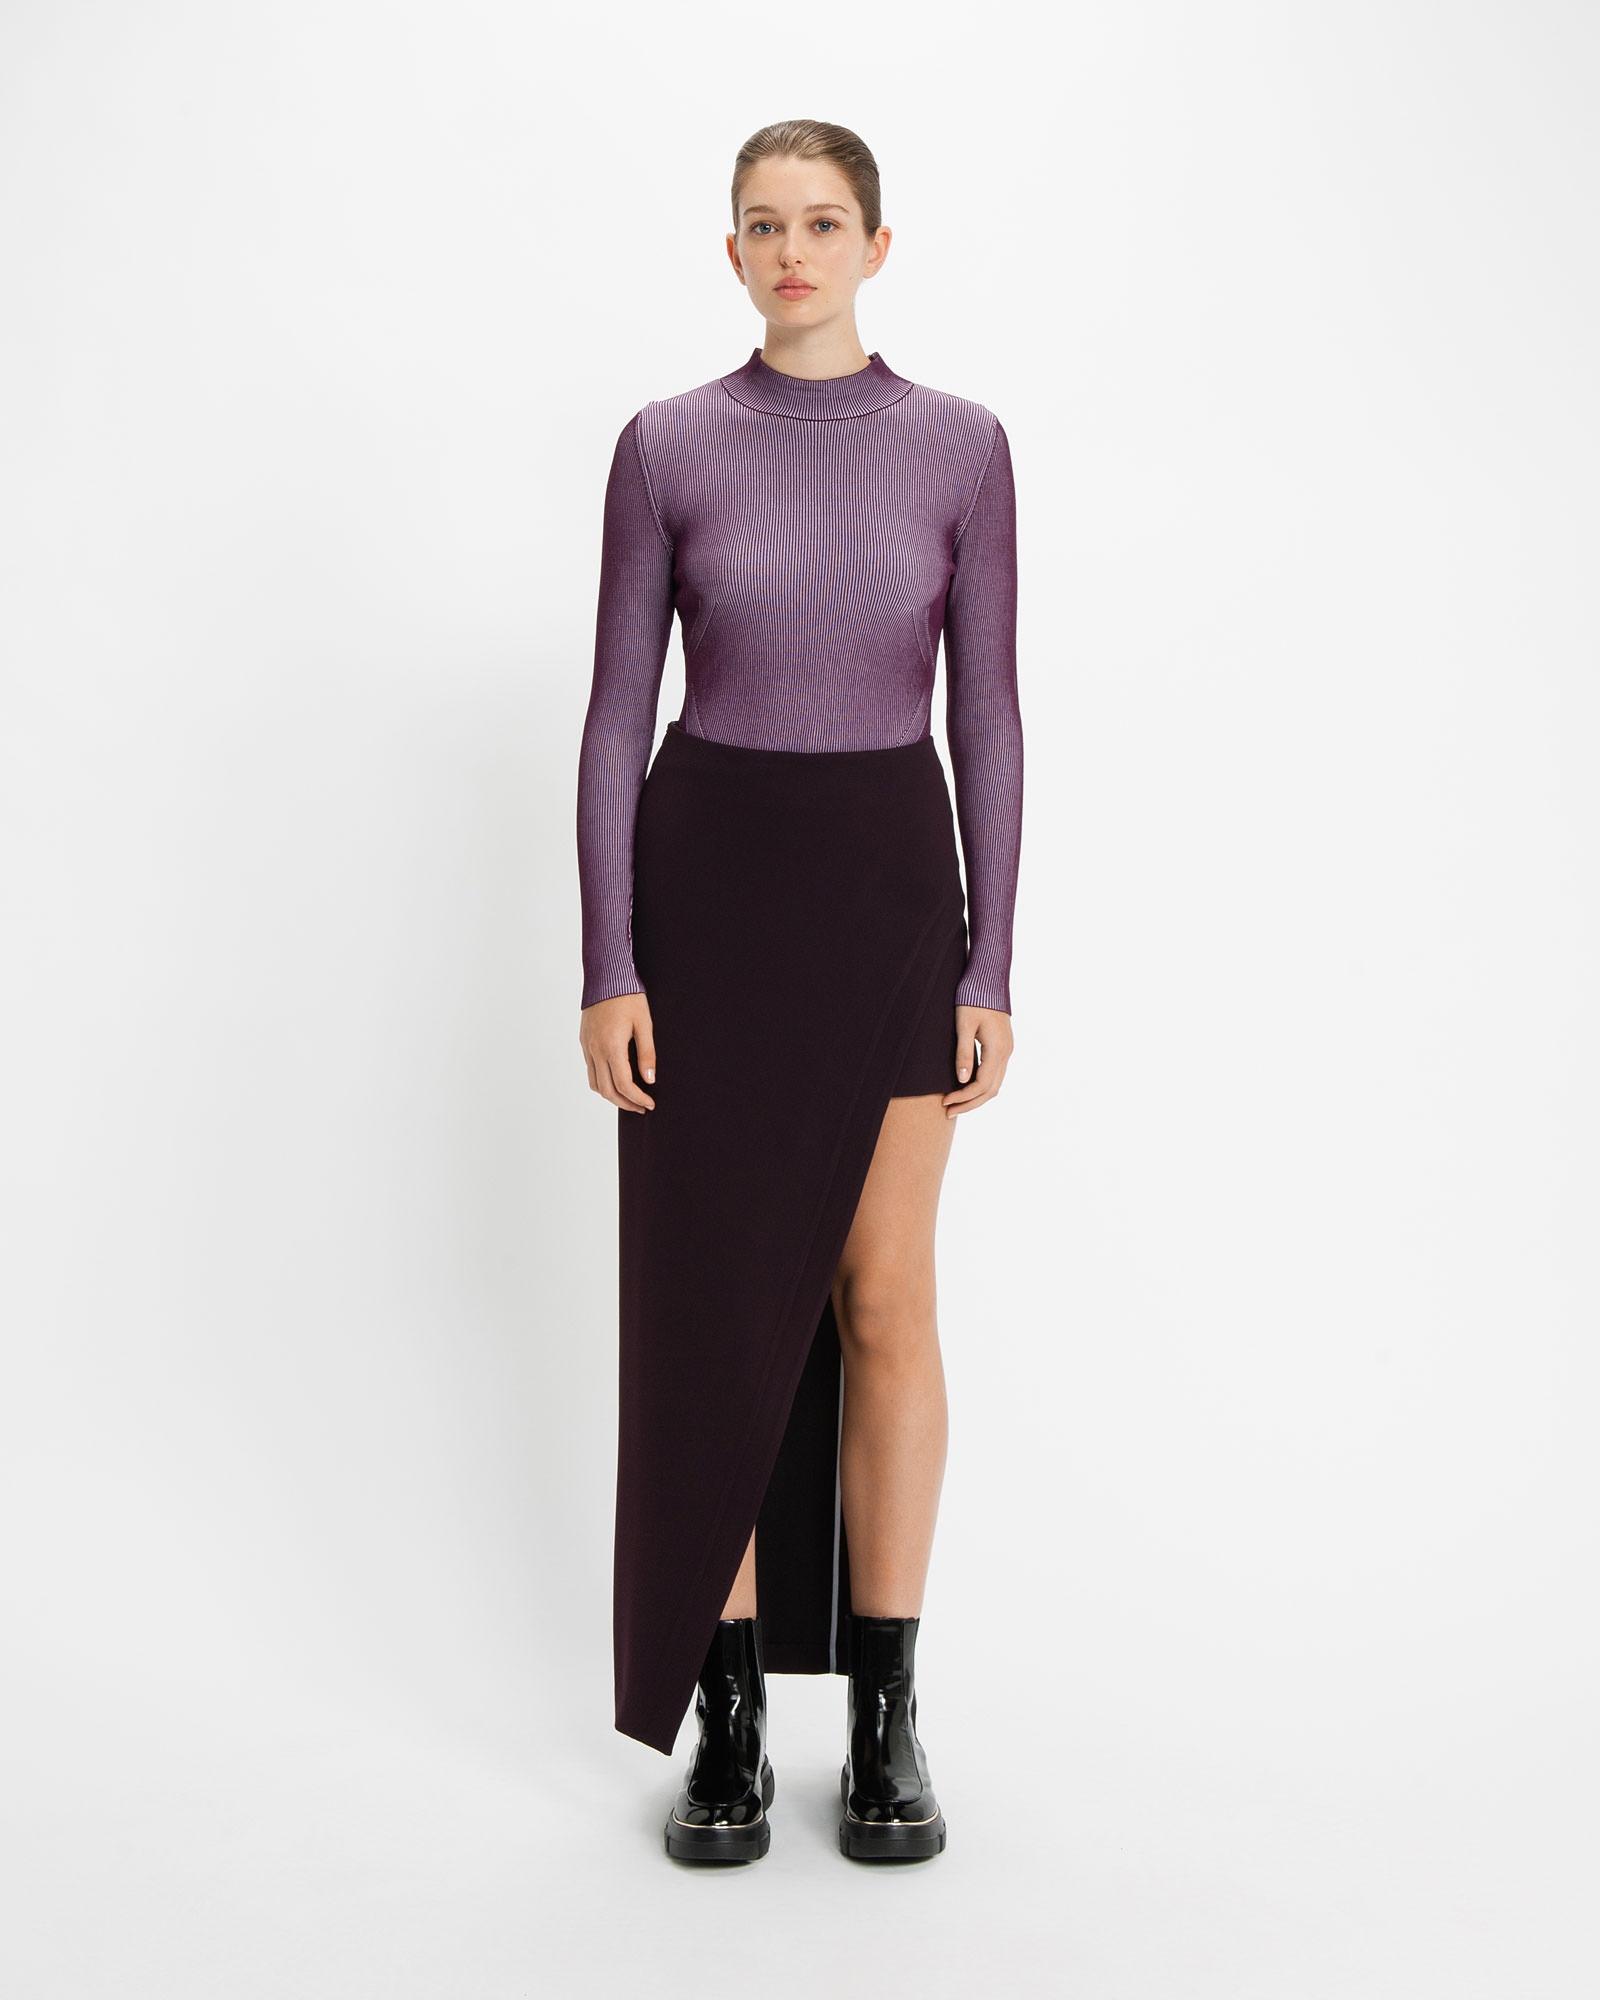 Knitwear | Two Toned Ribbed Knit | 690 Burgundy